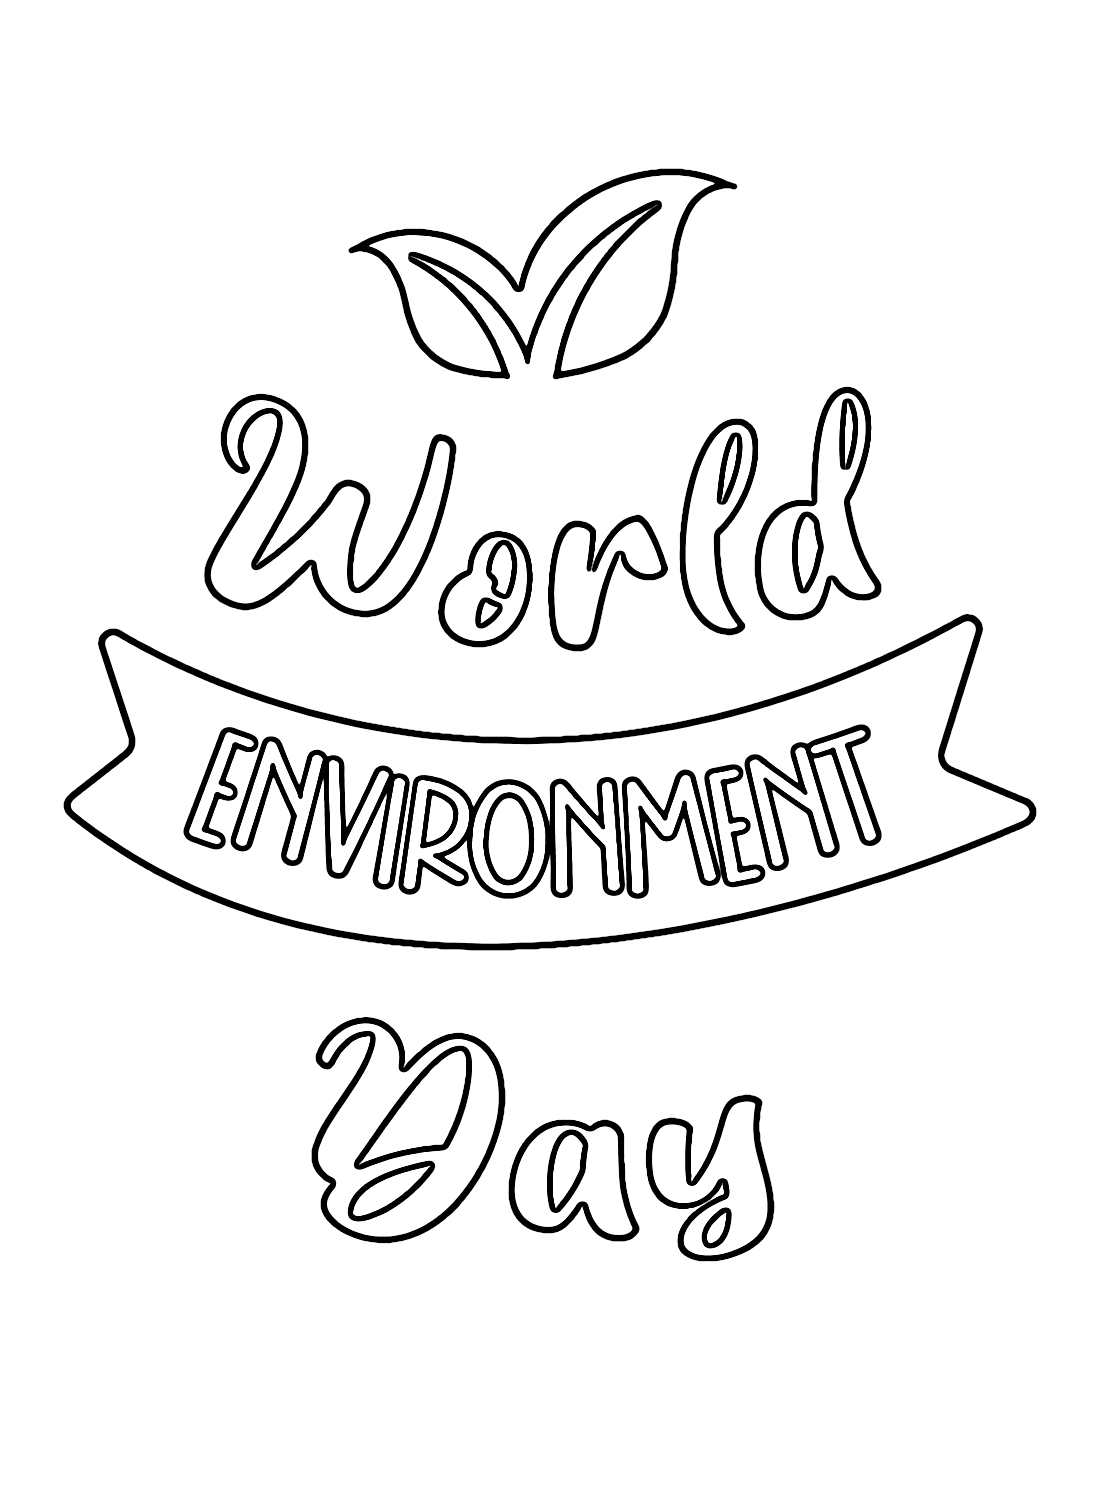 Printable World Environment Day Coloring Page